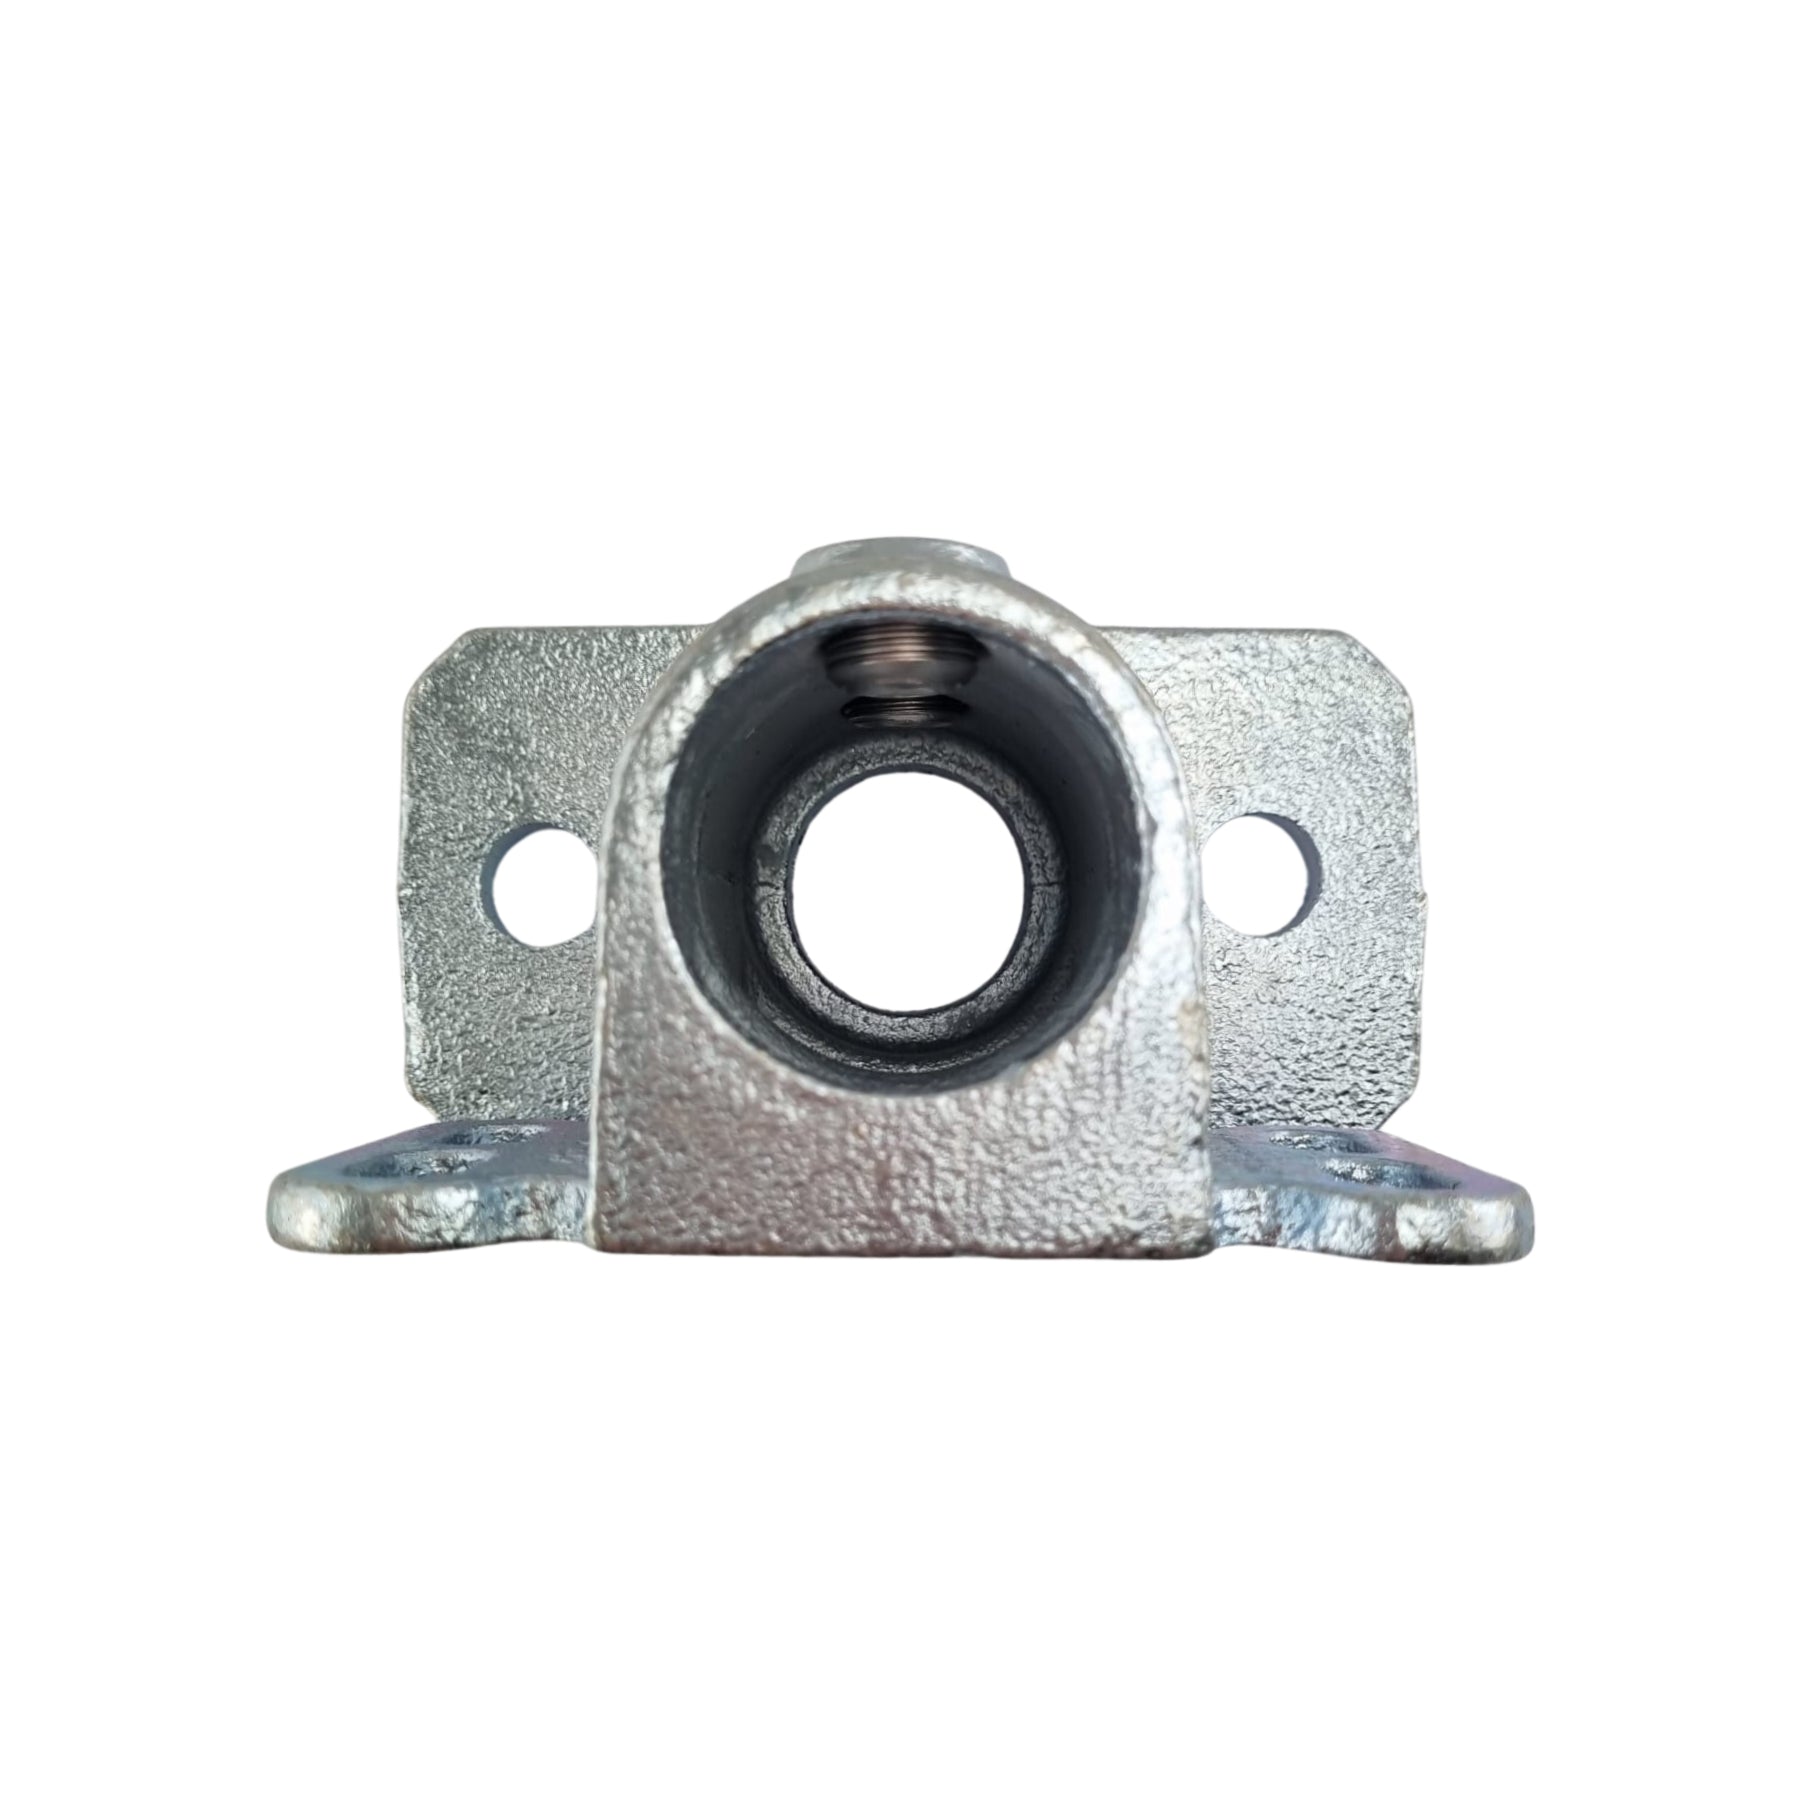 Floor Flange with Rear Fix Points for Galvanised Pipe. Interclamp code 242. Australia wide shipping. Shop chain.com.au